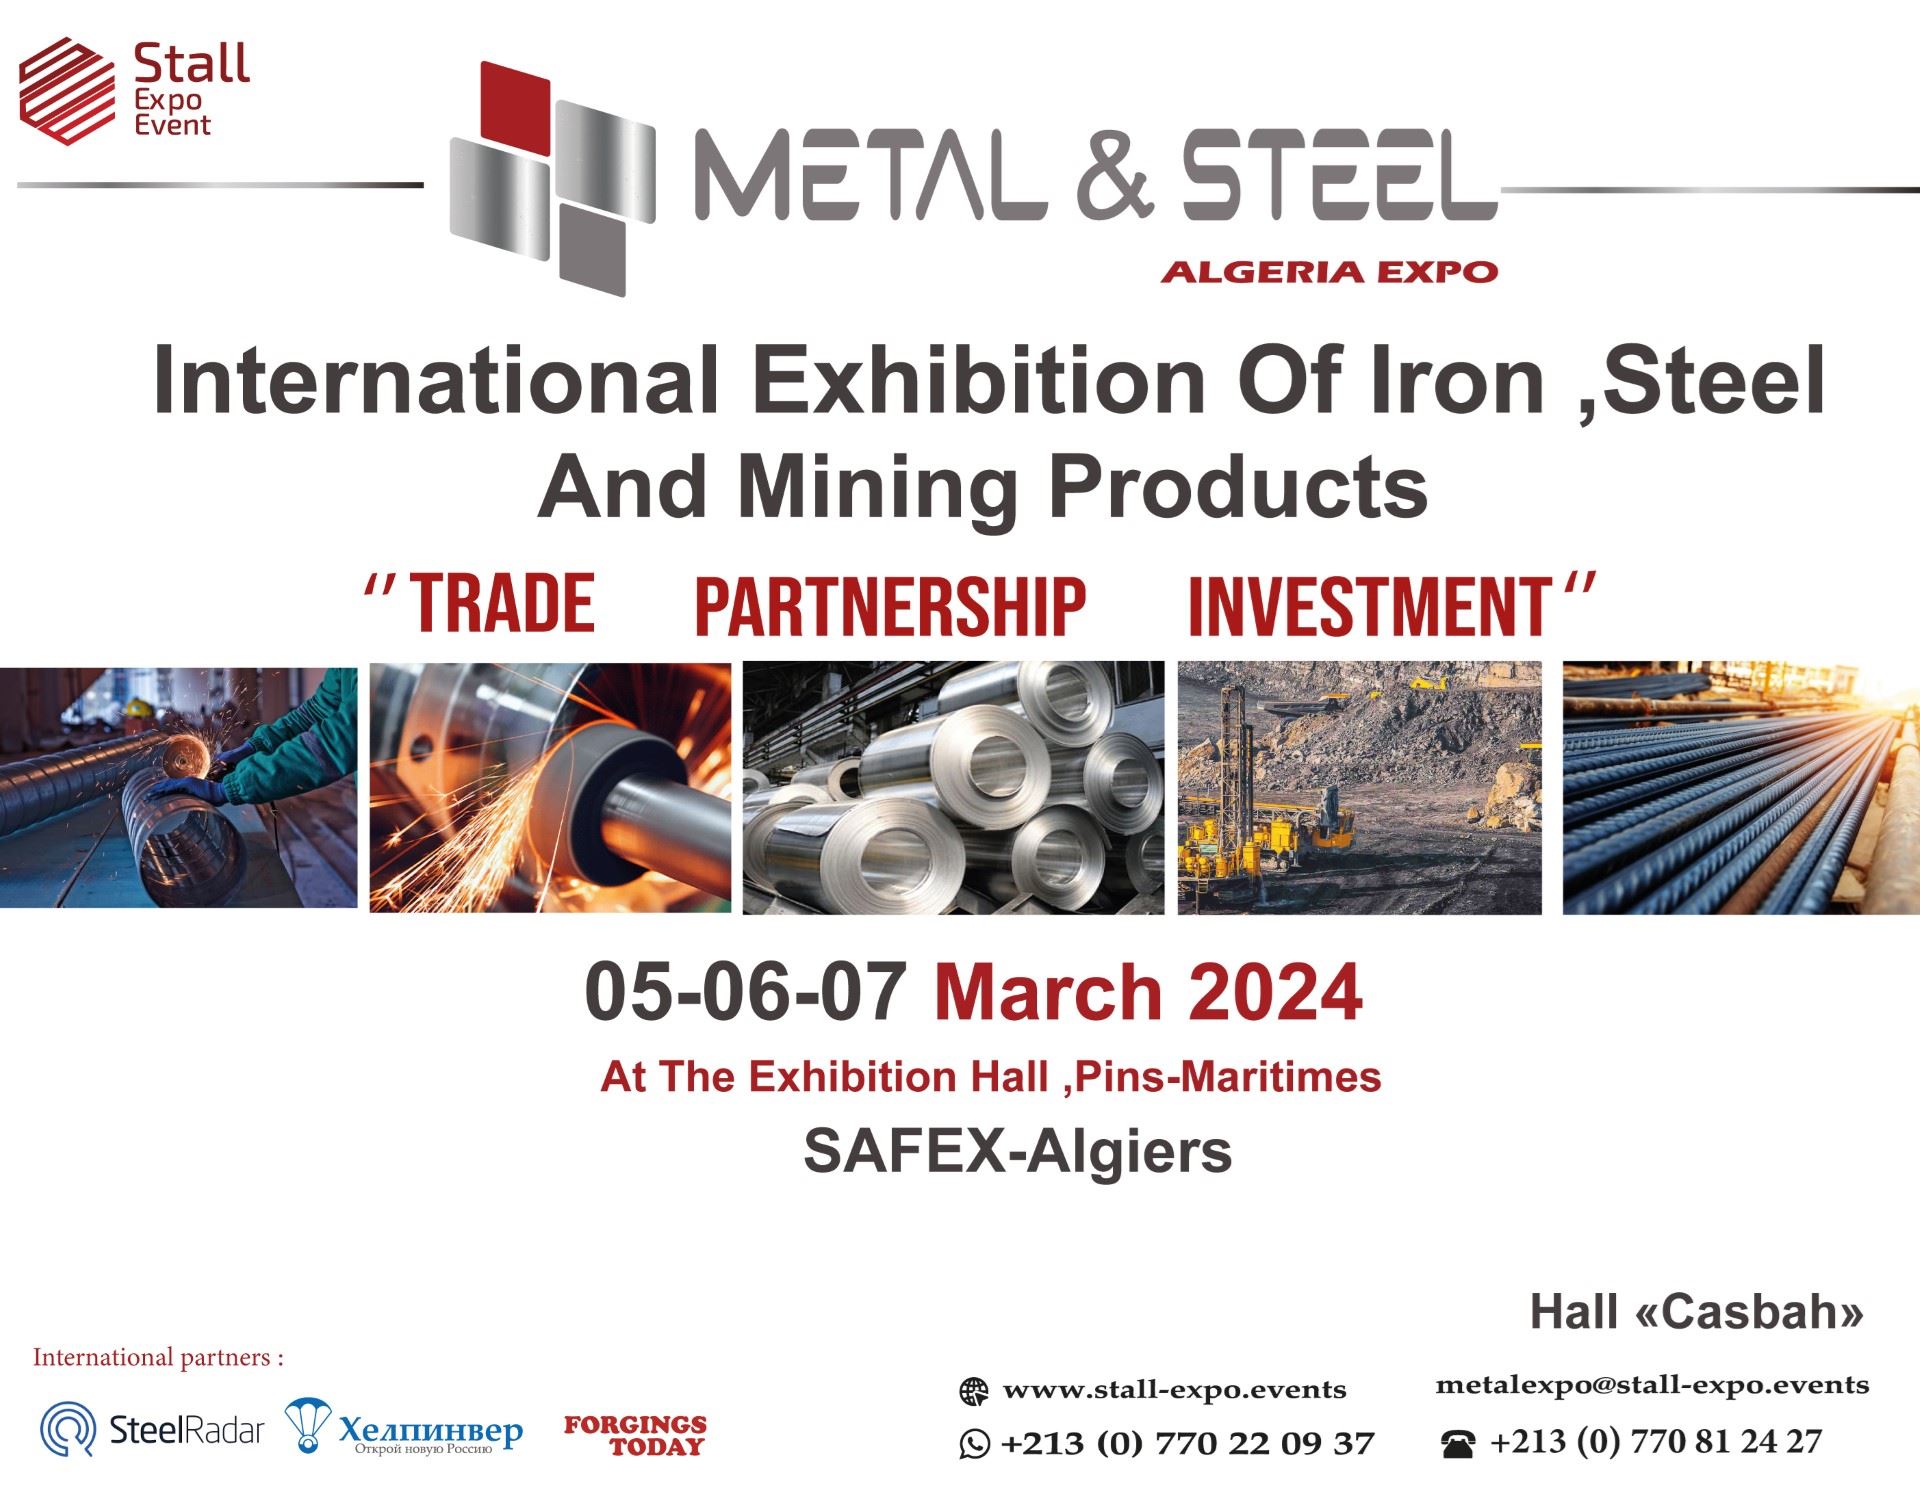 Metal & Steel Algeria Expo will bring the industry together on 5-7 March 2024